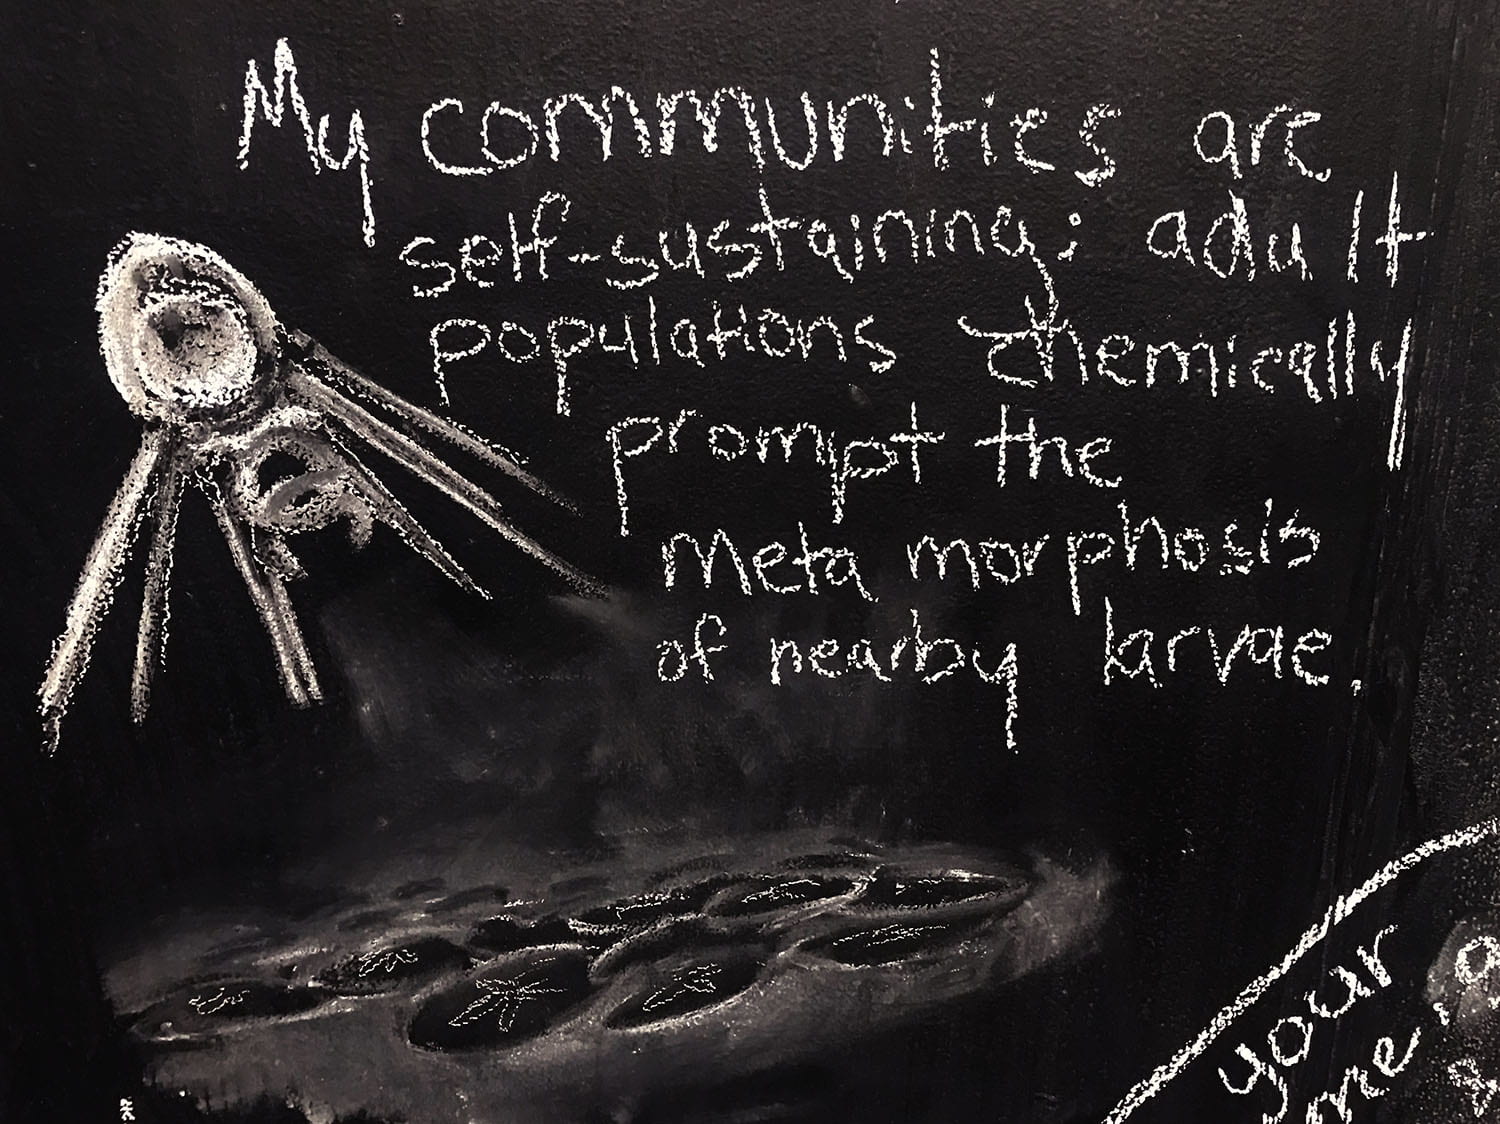 drawing of a squid-like figure hovering over sand dollars. Handwriting says: My communities are self-sustaining; adult populations chemically prompt the metamorphosis of nearby larvae.